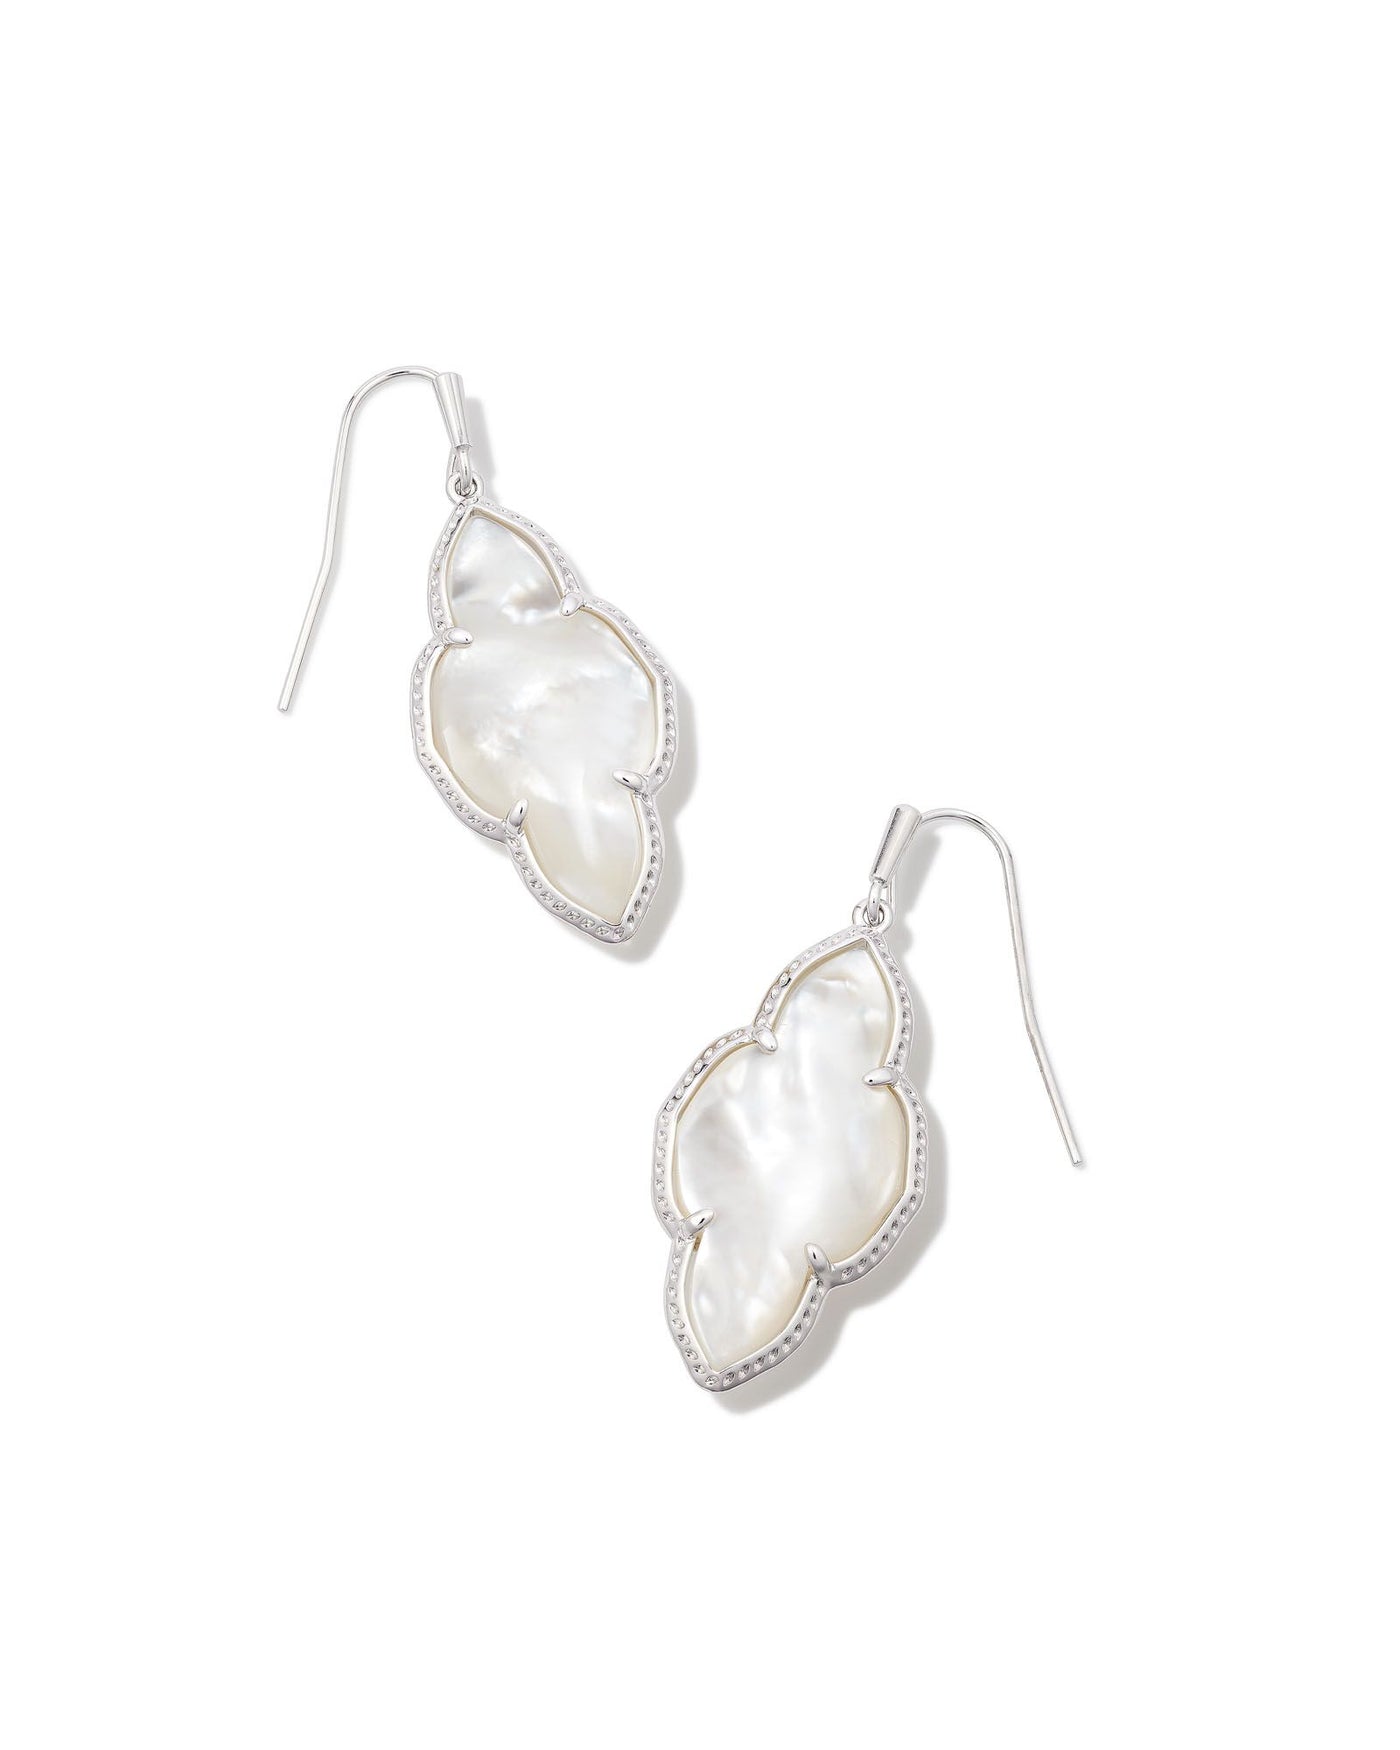 Kendra Scott Abbie Drop Earrings Silver Ivory Mother Of Pearl-Earrings-Kendra Scott-Market Street Nest, Fashionable Clothing, Shoes and Home Décor Located in Mabank, TX